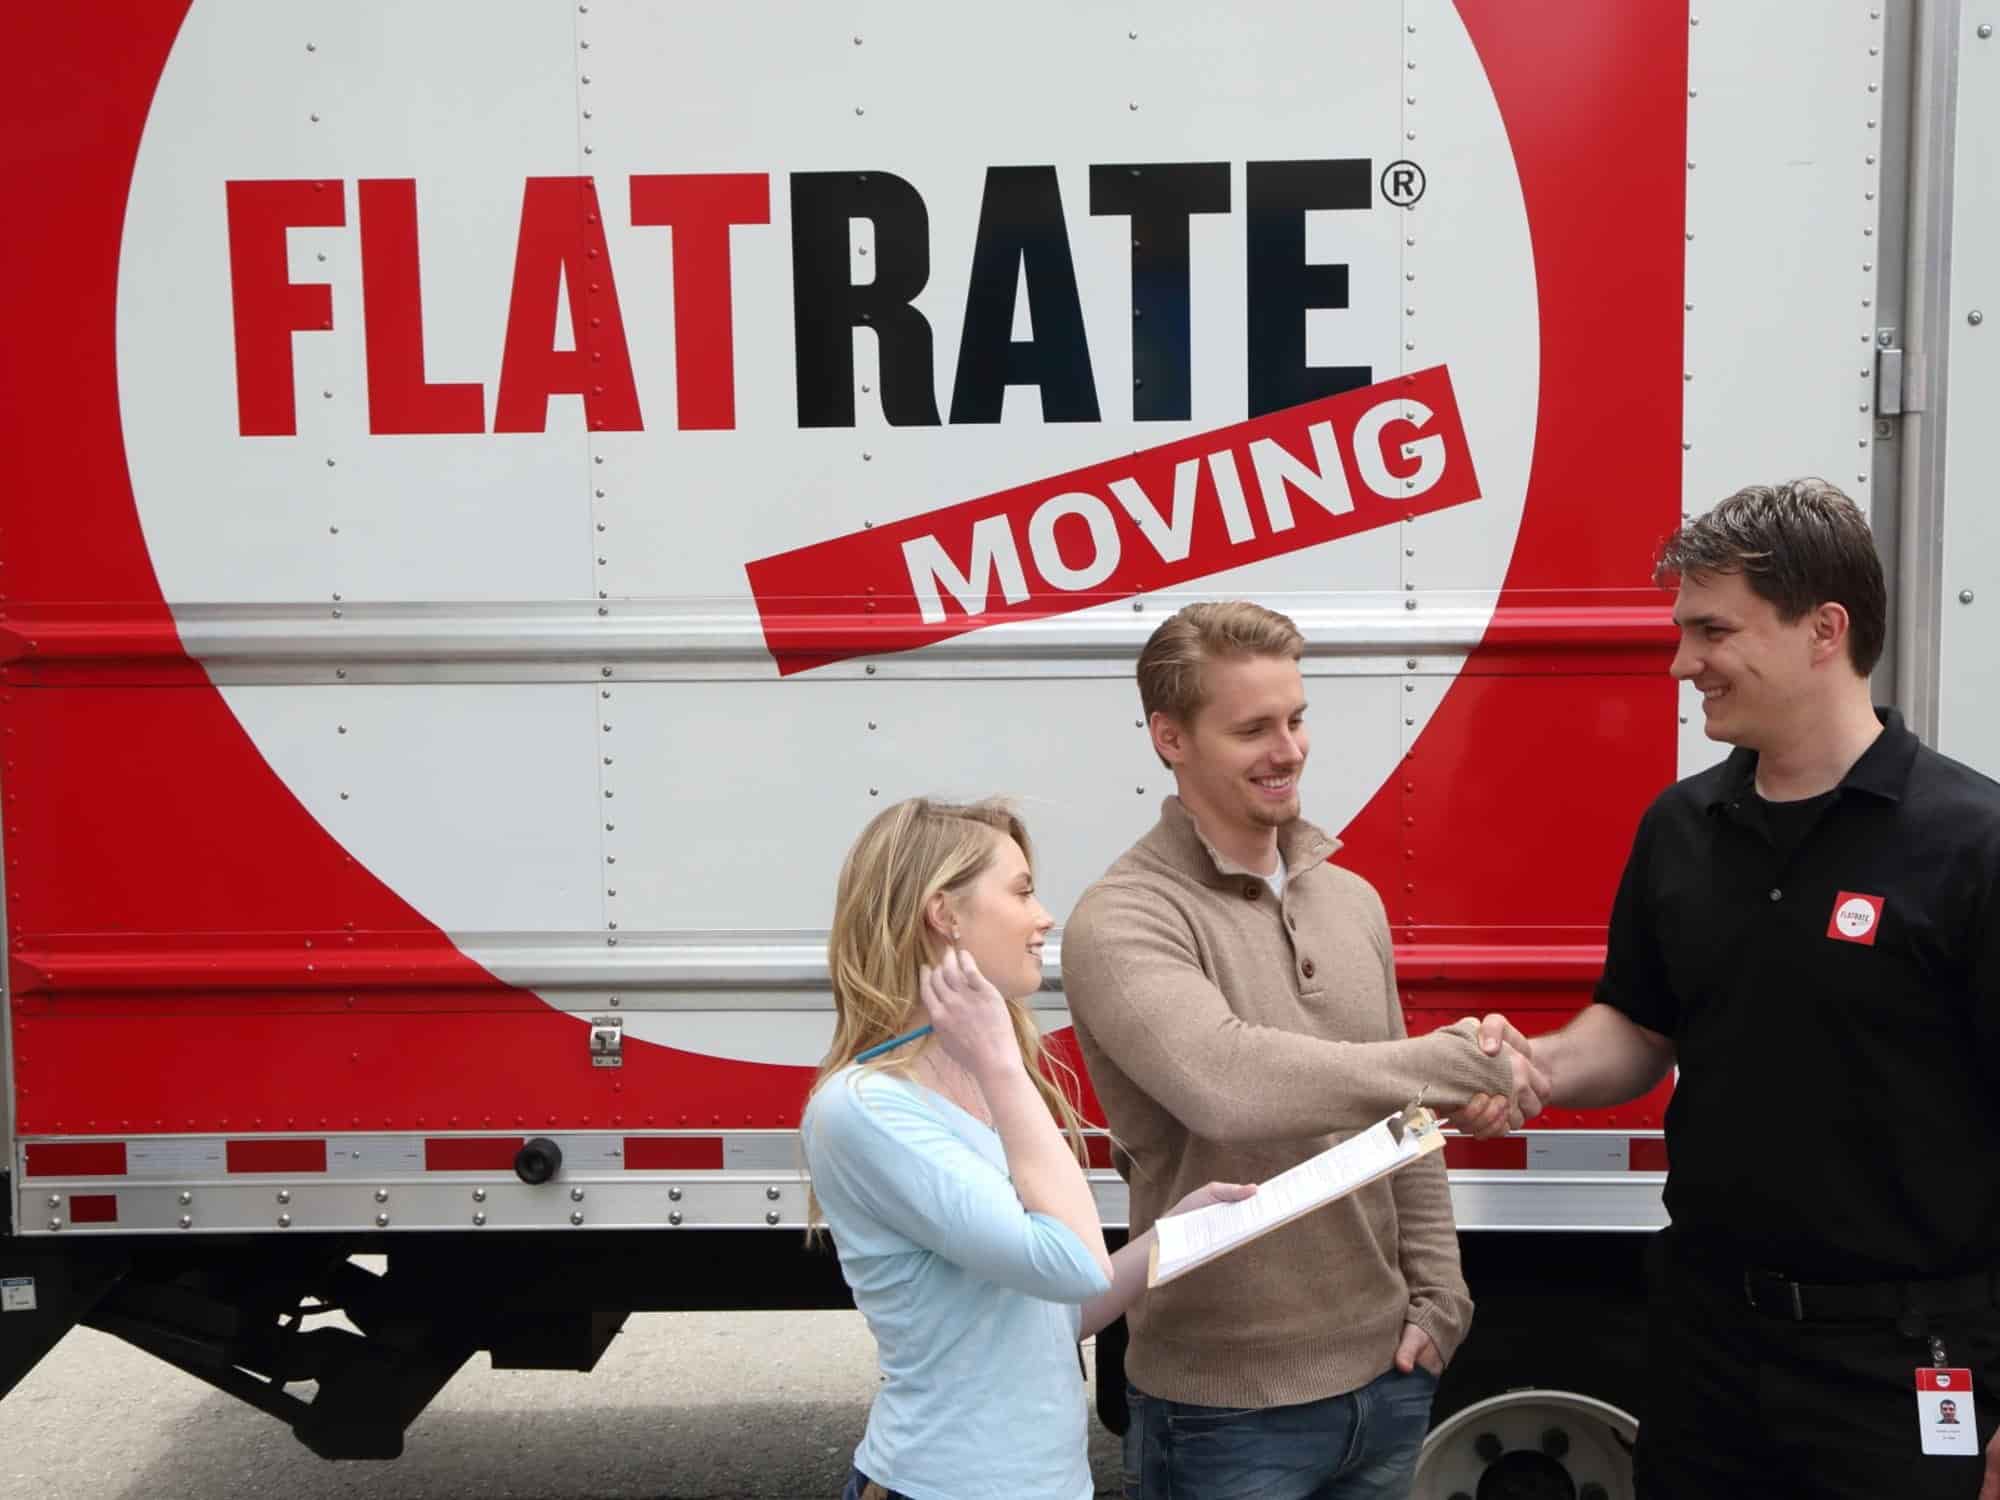 The Best Moving Service In LA | FlatRate Moving